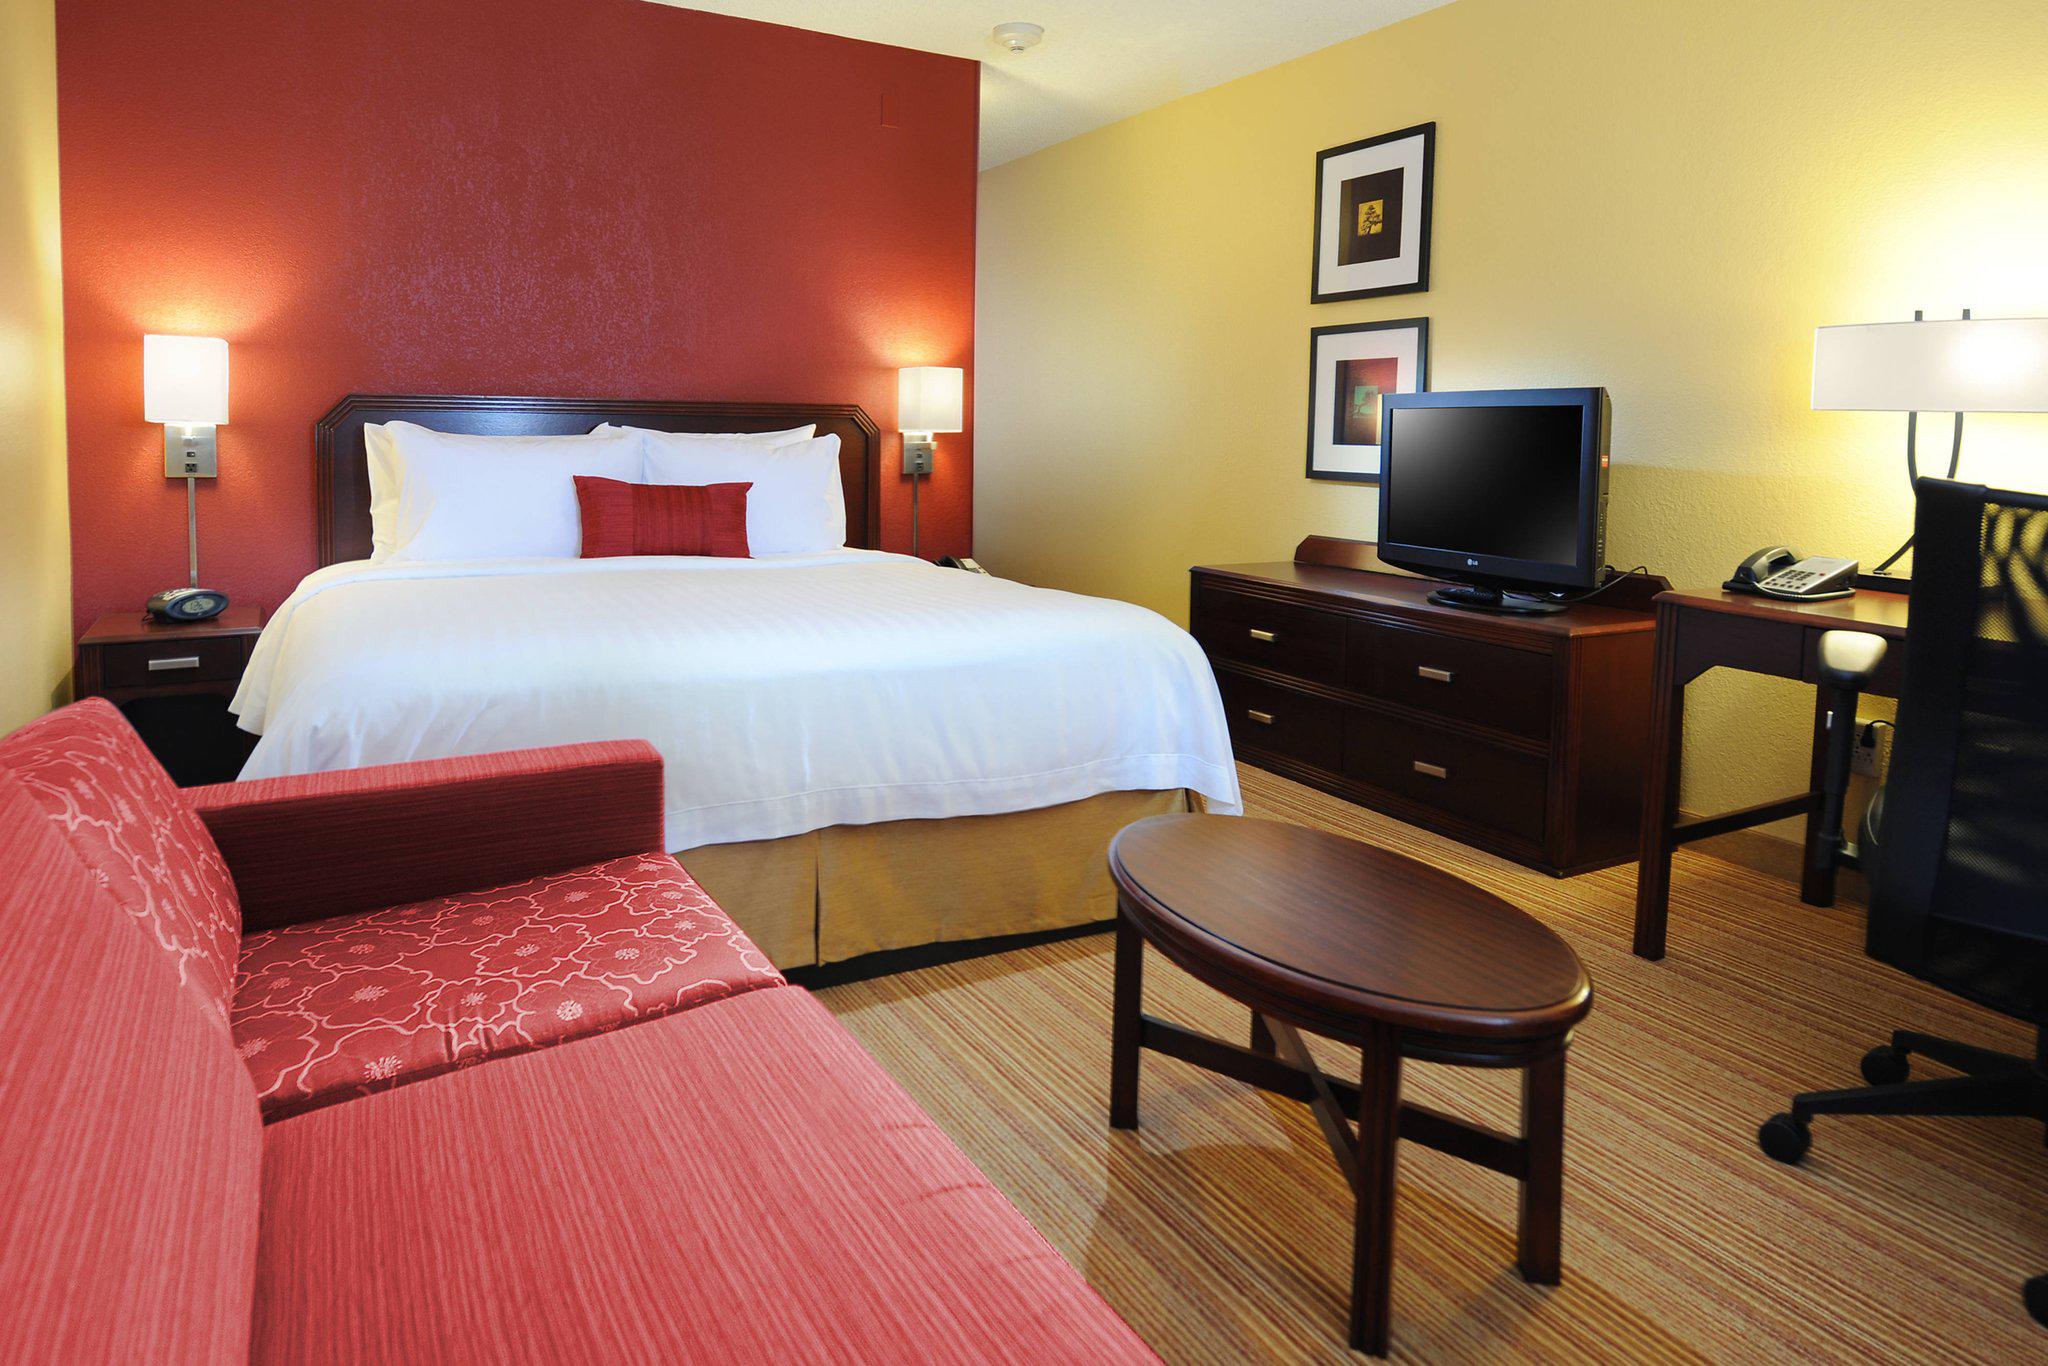 Courtyard by Marriott Houston Hobby Airport